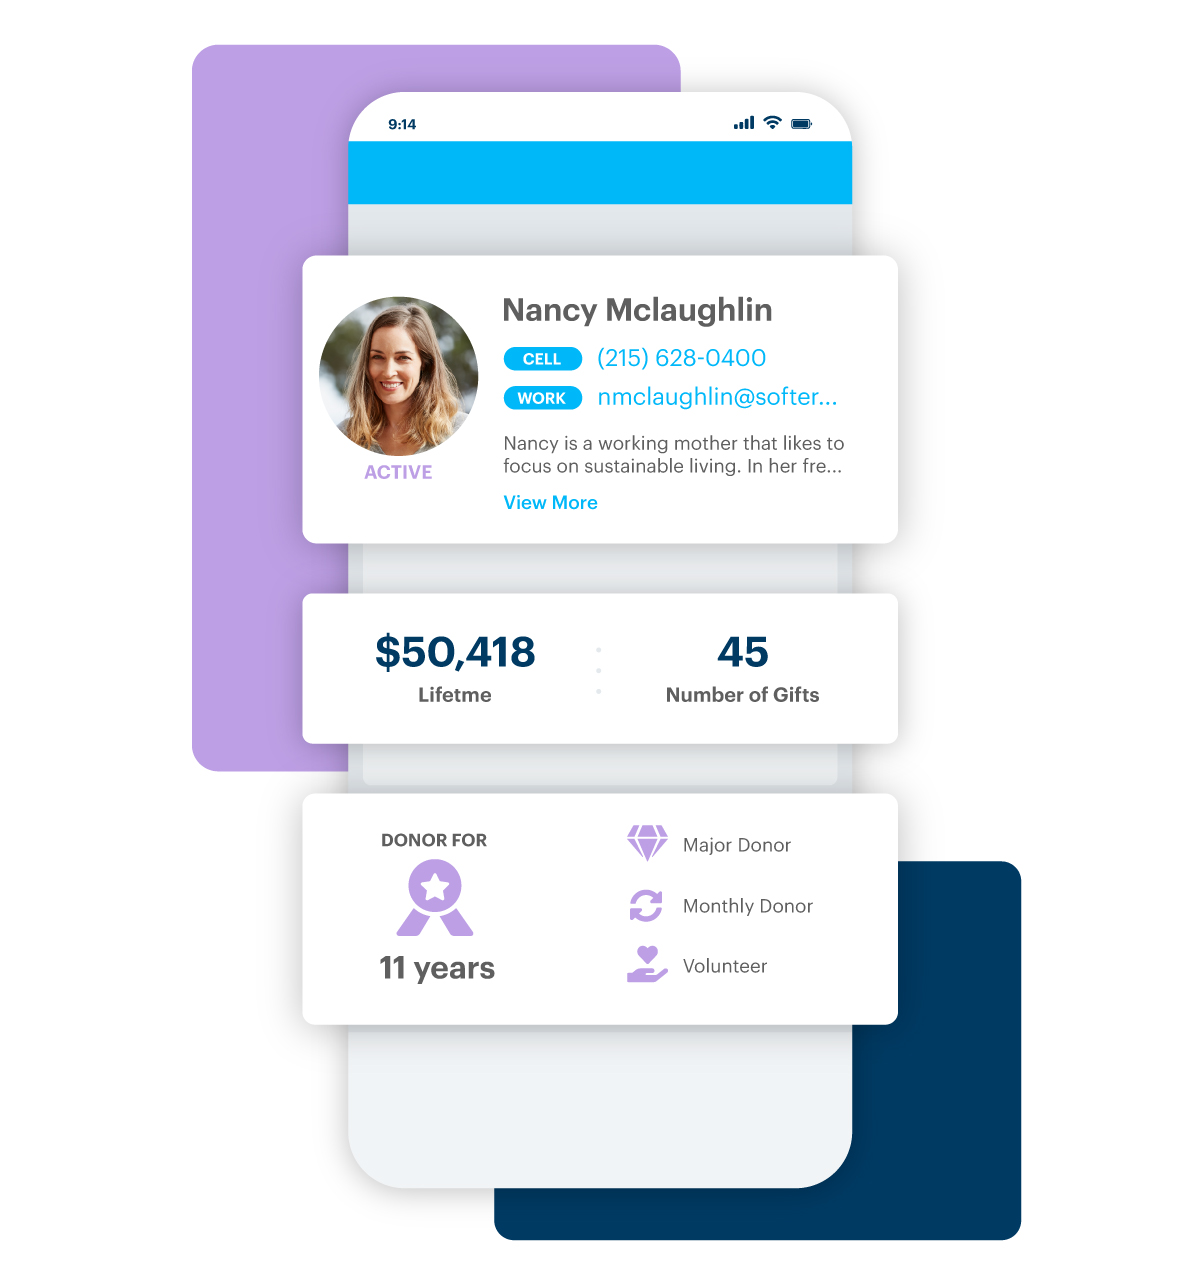 DonorPerfect Mobile App Donor Profile Mockup